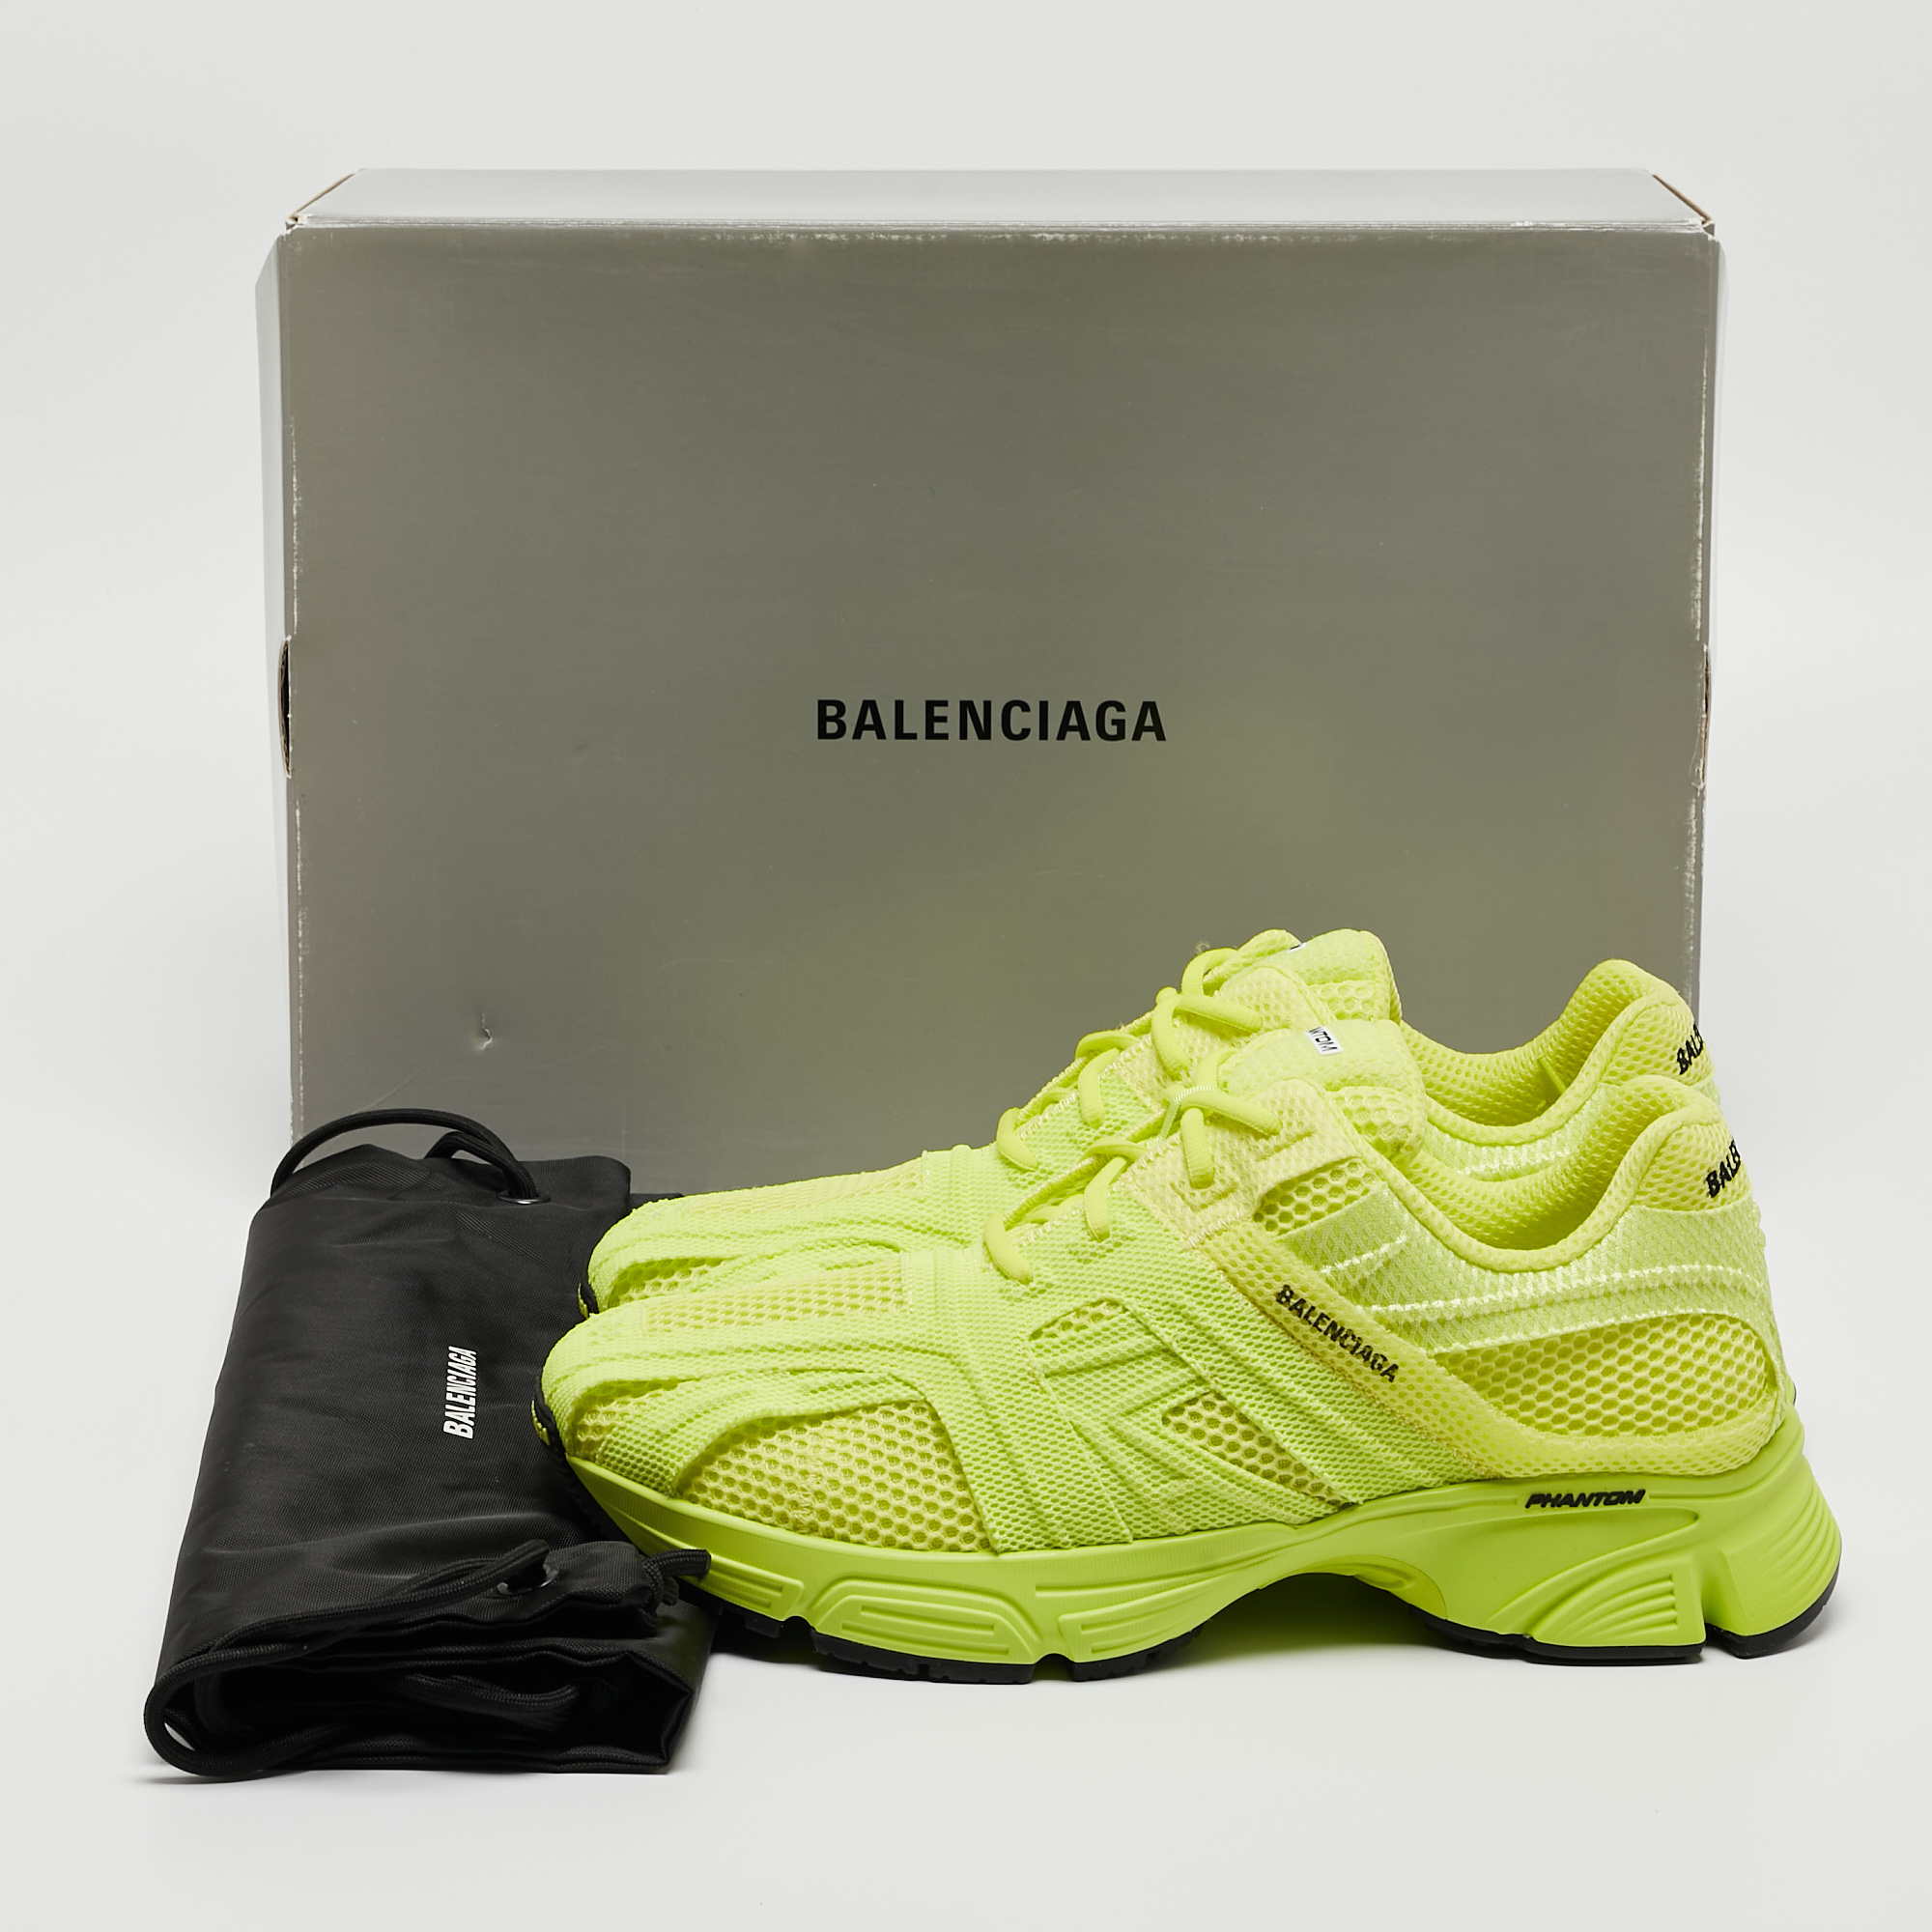 Balenciaga Green Mesh And Fabric Low Top Sneakers Size 44